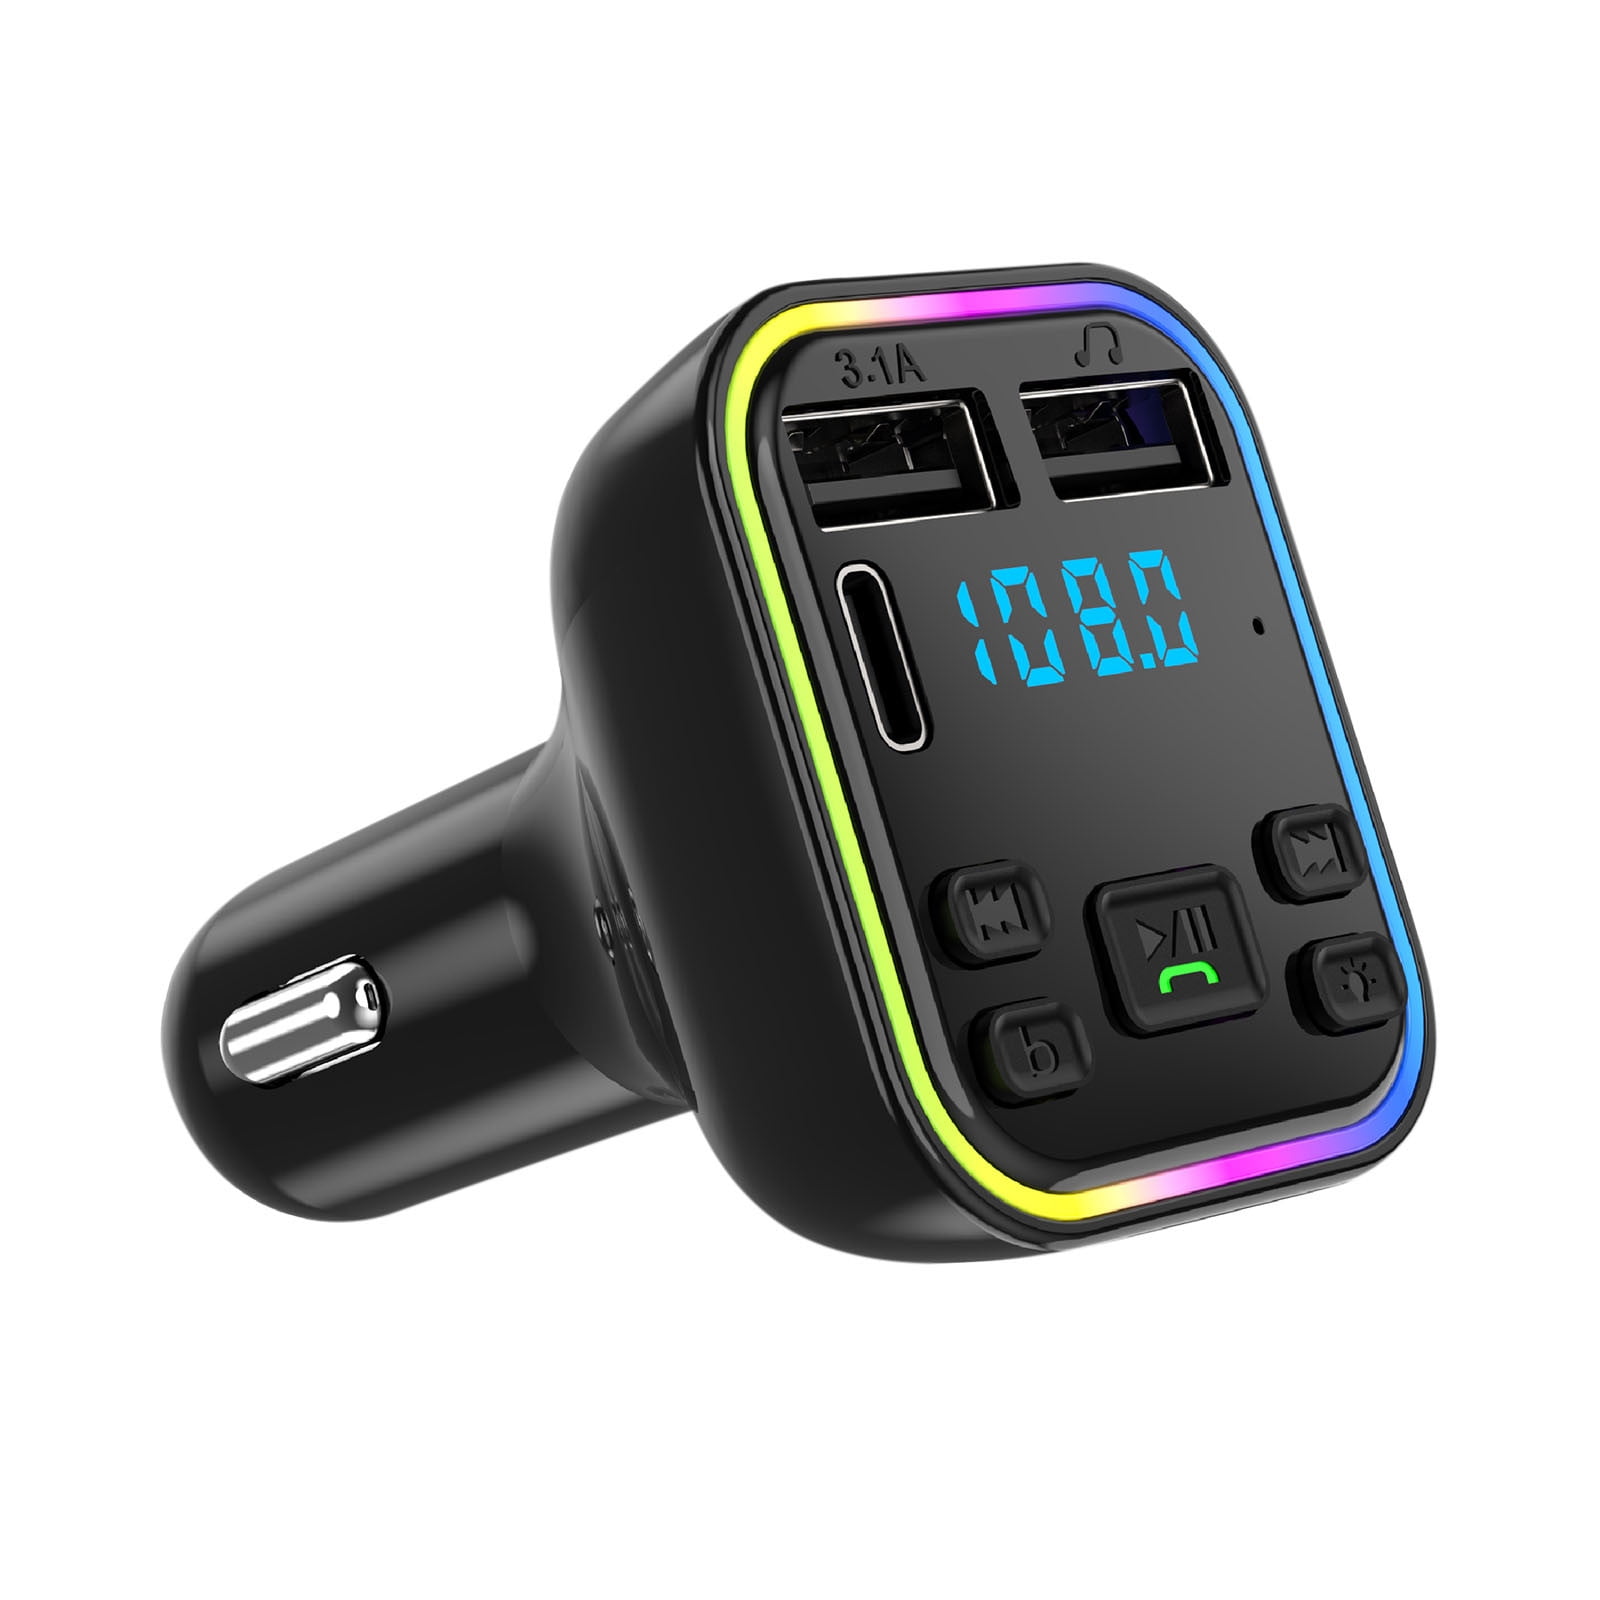 Dropship Bluetooth Wireless Car FM Transmitter AUX Stereo Receiver Adapter  2 USB Charger to Sell Online at a Lower Price